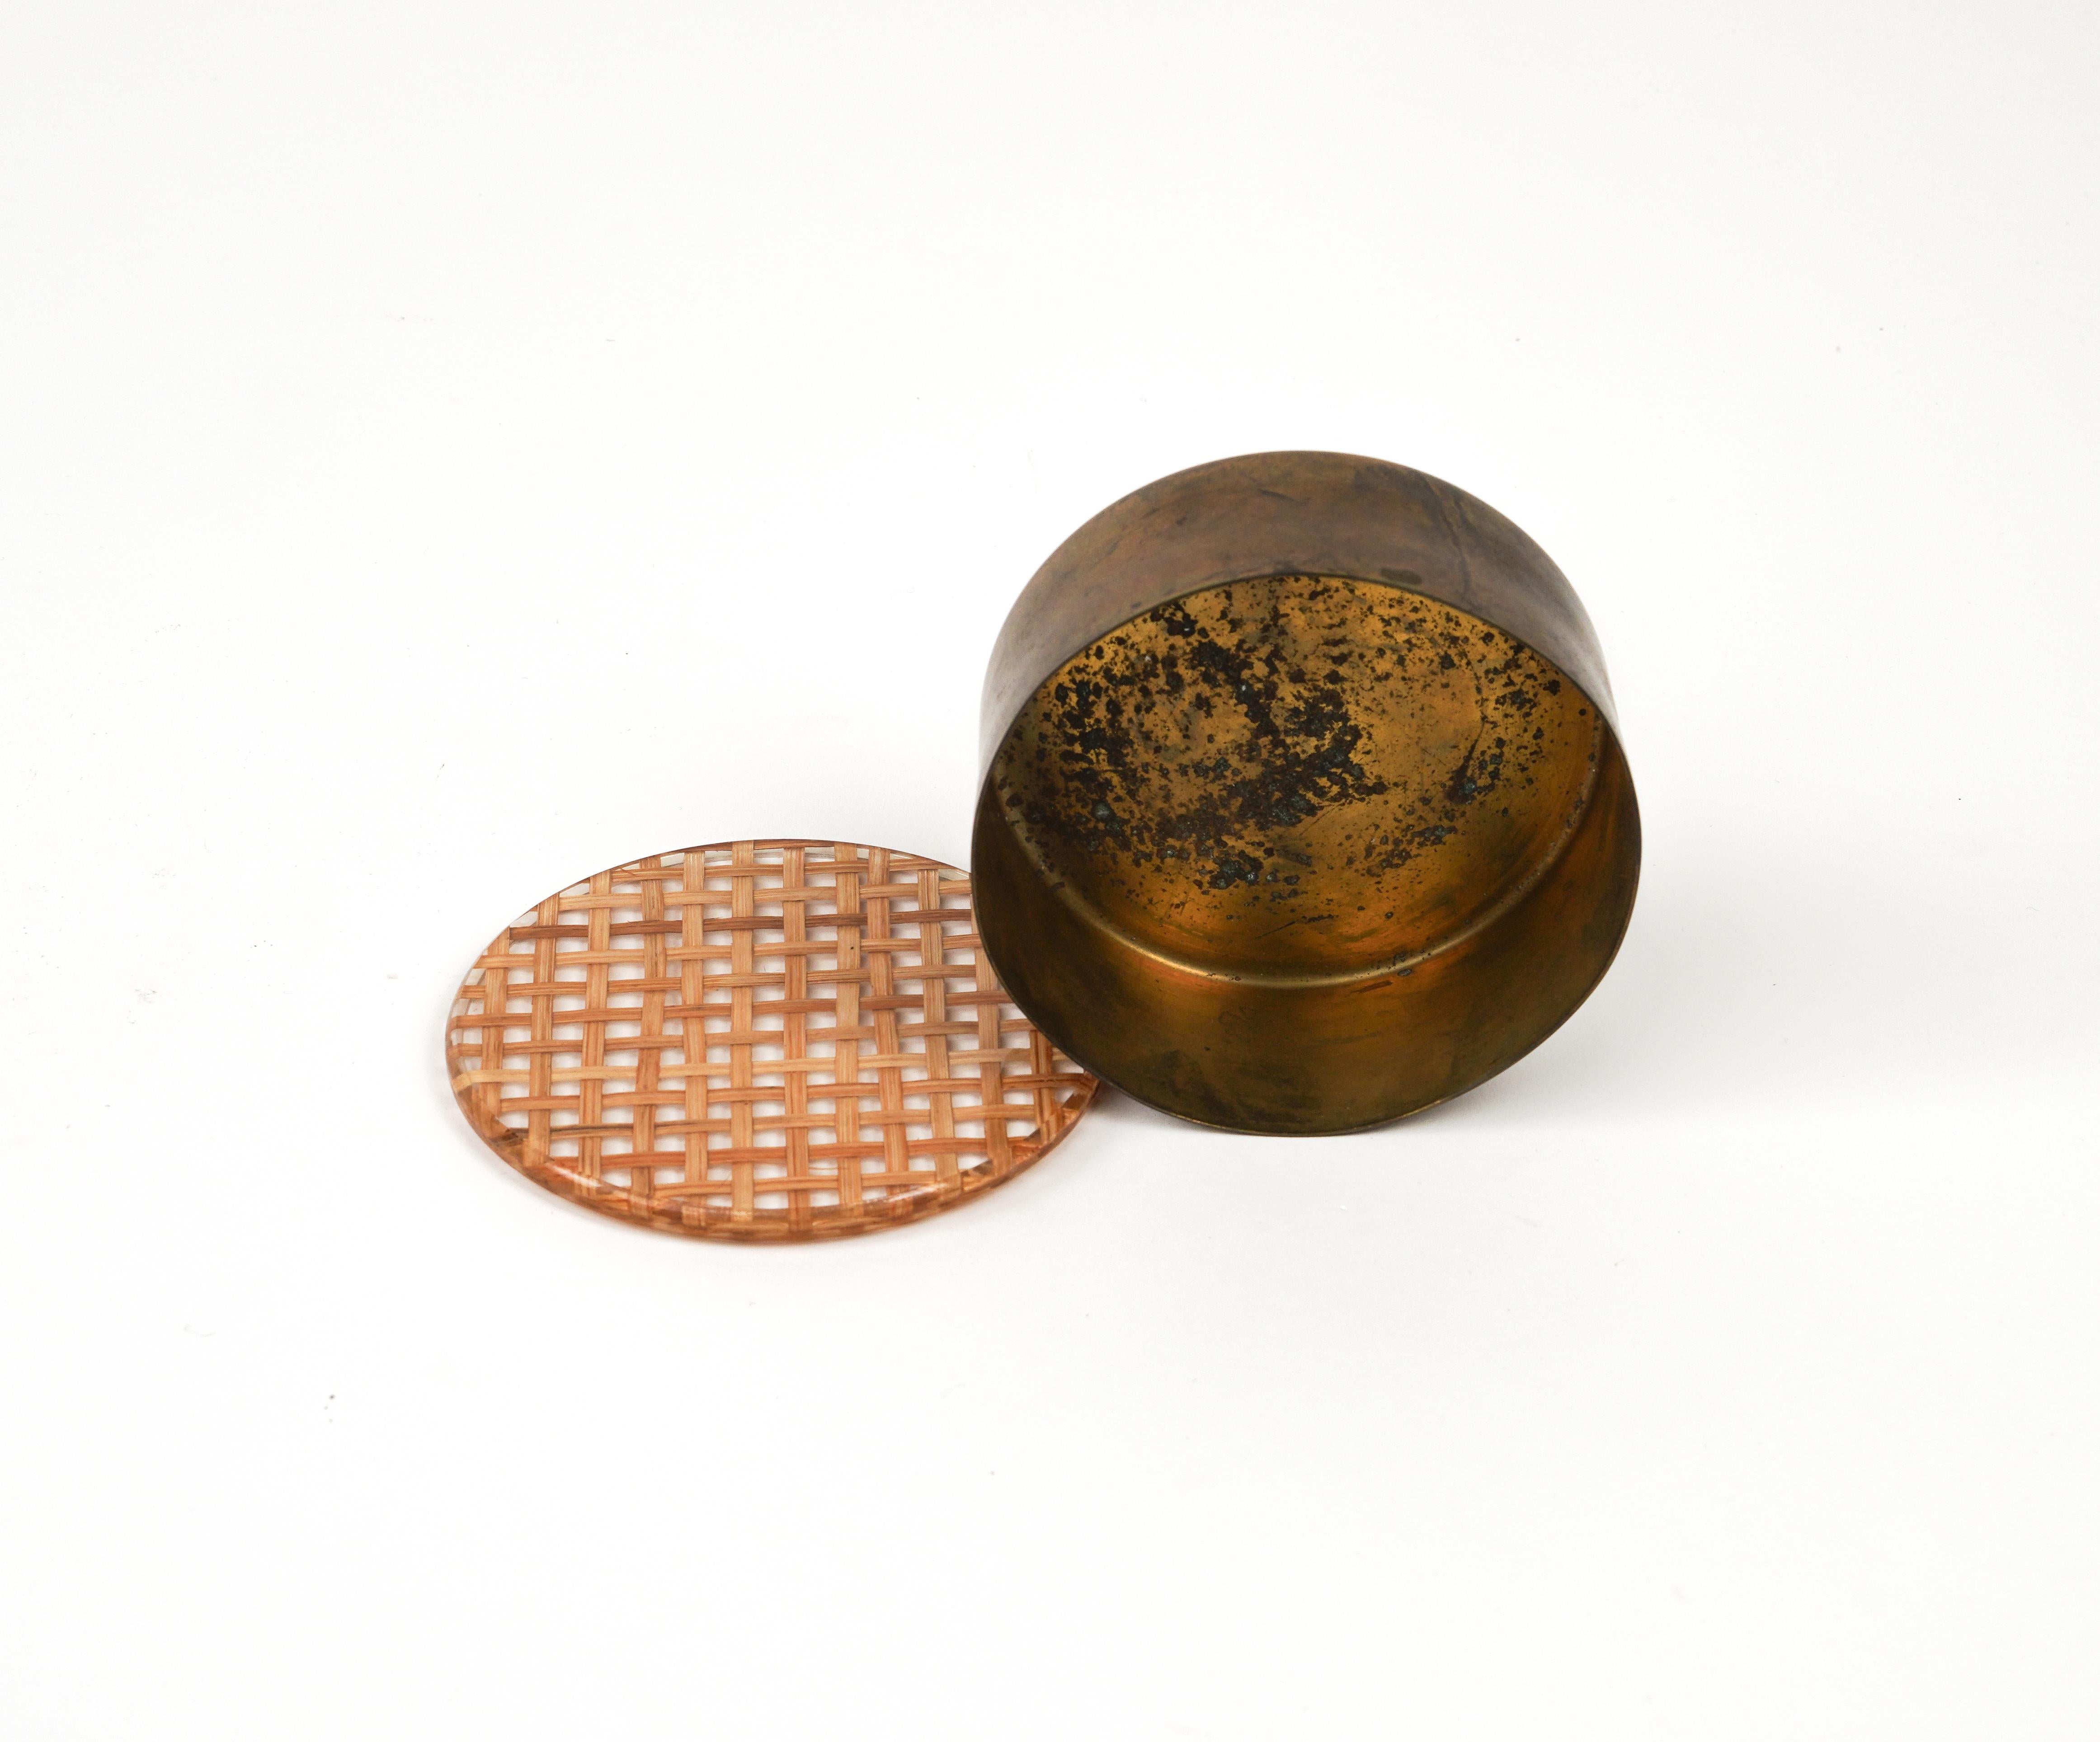 Midcentury Round Box in Brass, Lucite & Rattan Christian Dior Style, Italy 1970s For Sale 4